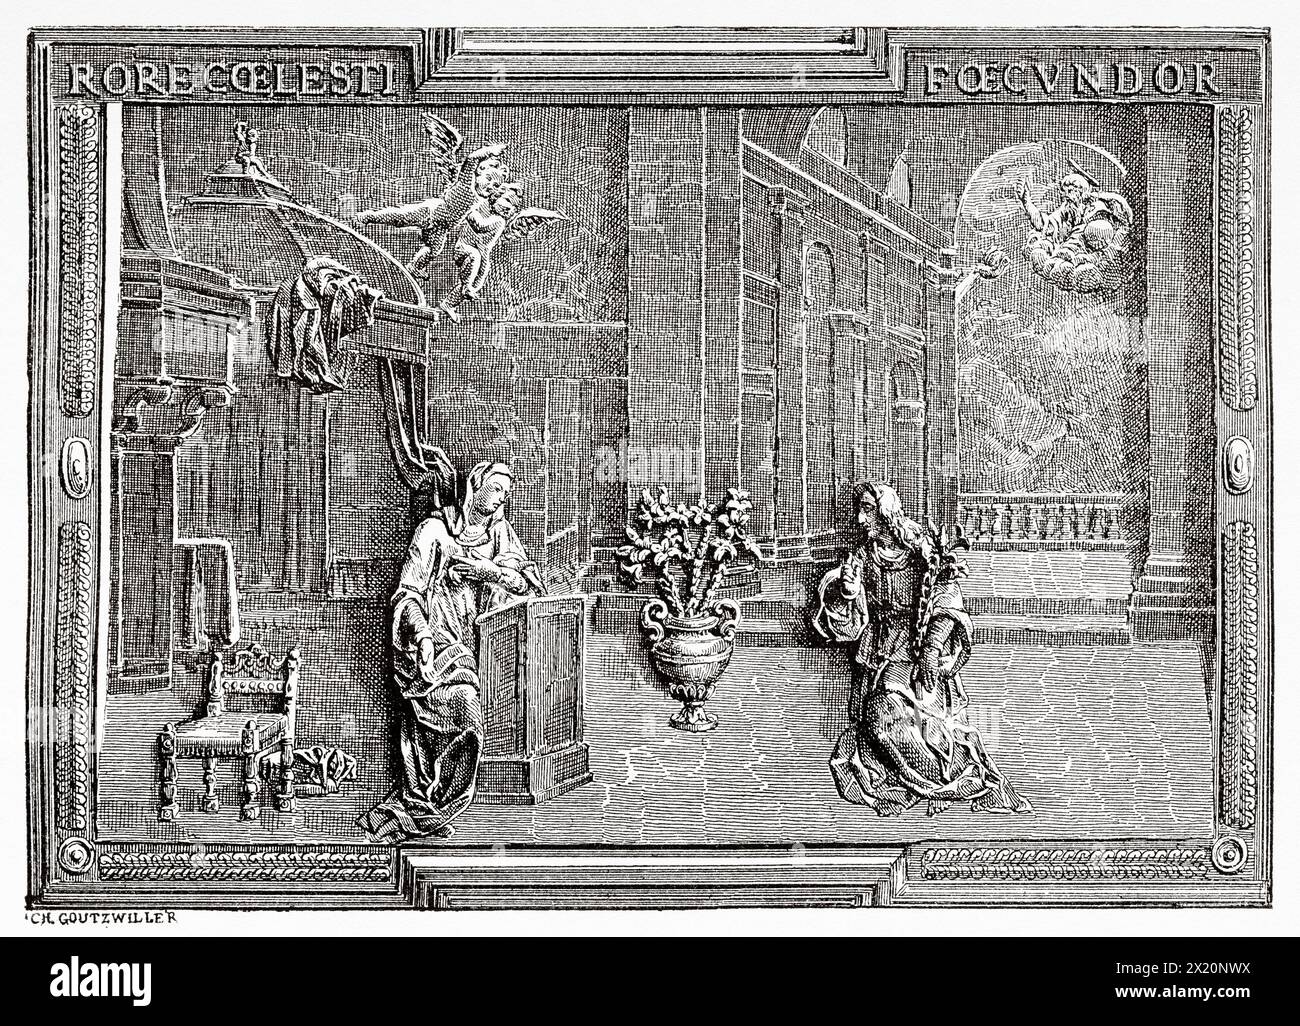 Annunciation of the Virgin Mary, bronze door of John Bologna, The Cathedral of Santa Maria Assunta in Piazza dei Miracoli, Pisa. Tuscany, Italy. Europe. Drawing by  Goutzwiller. Travel through Tuscany 1881 by Eugene Muntz (1845 - 1902) Le Tour du Monde 1886 Stock Photo